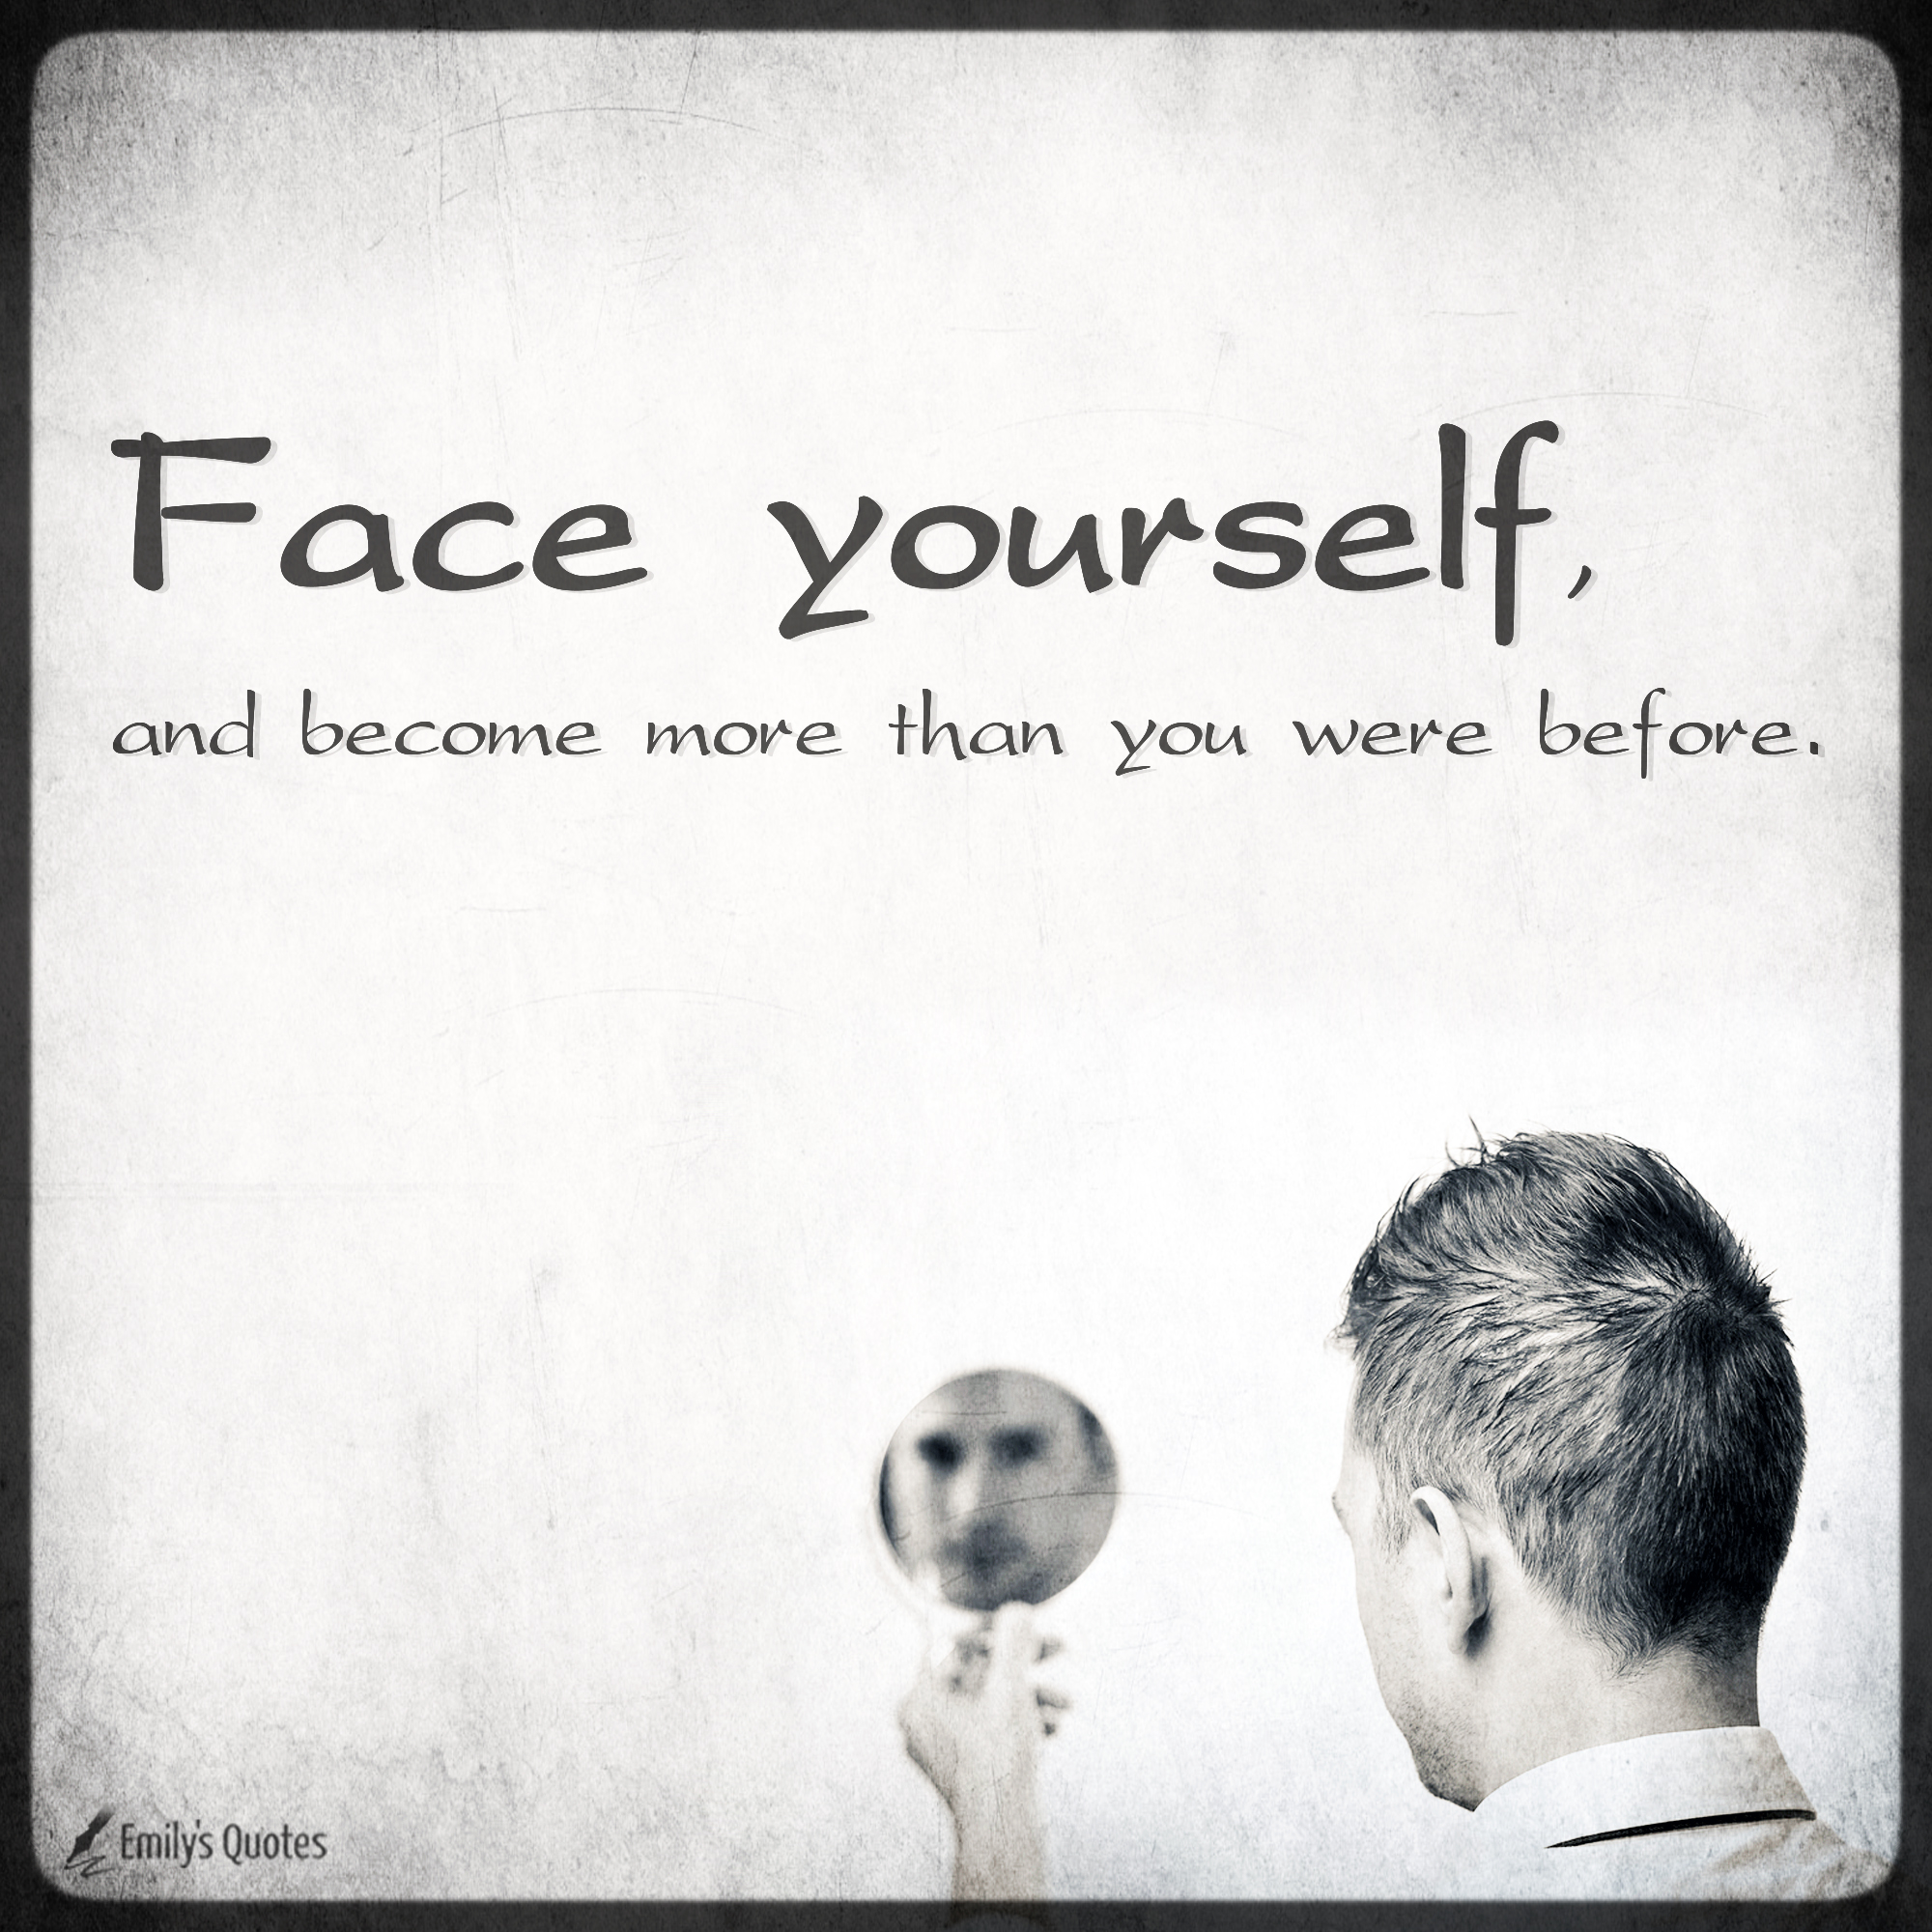 Face yourself, and become more than you were before